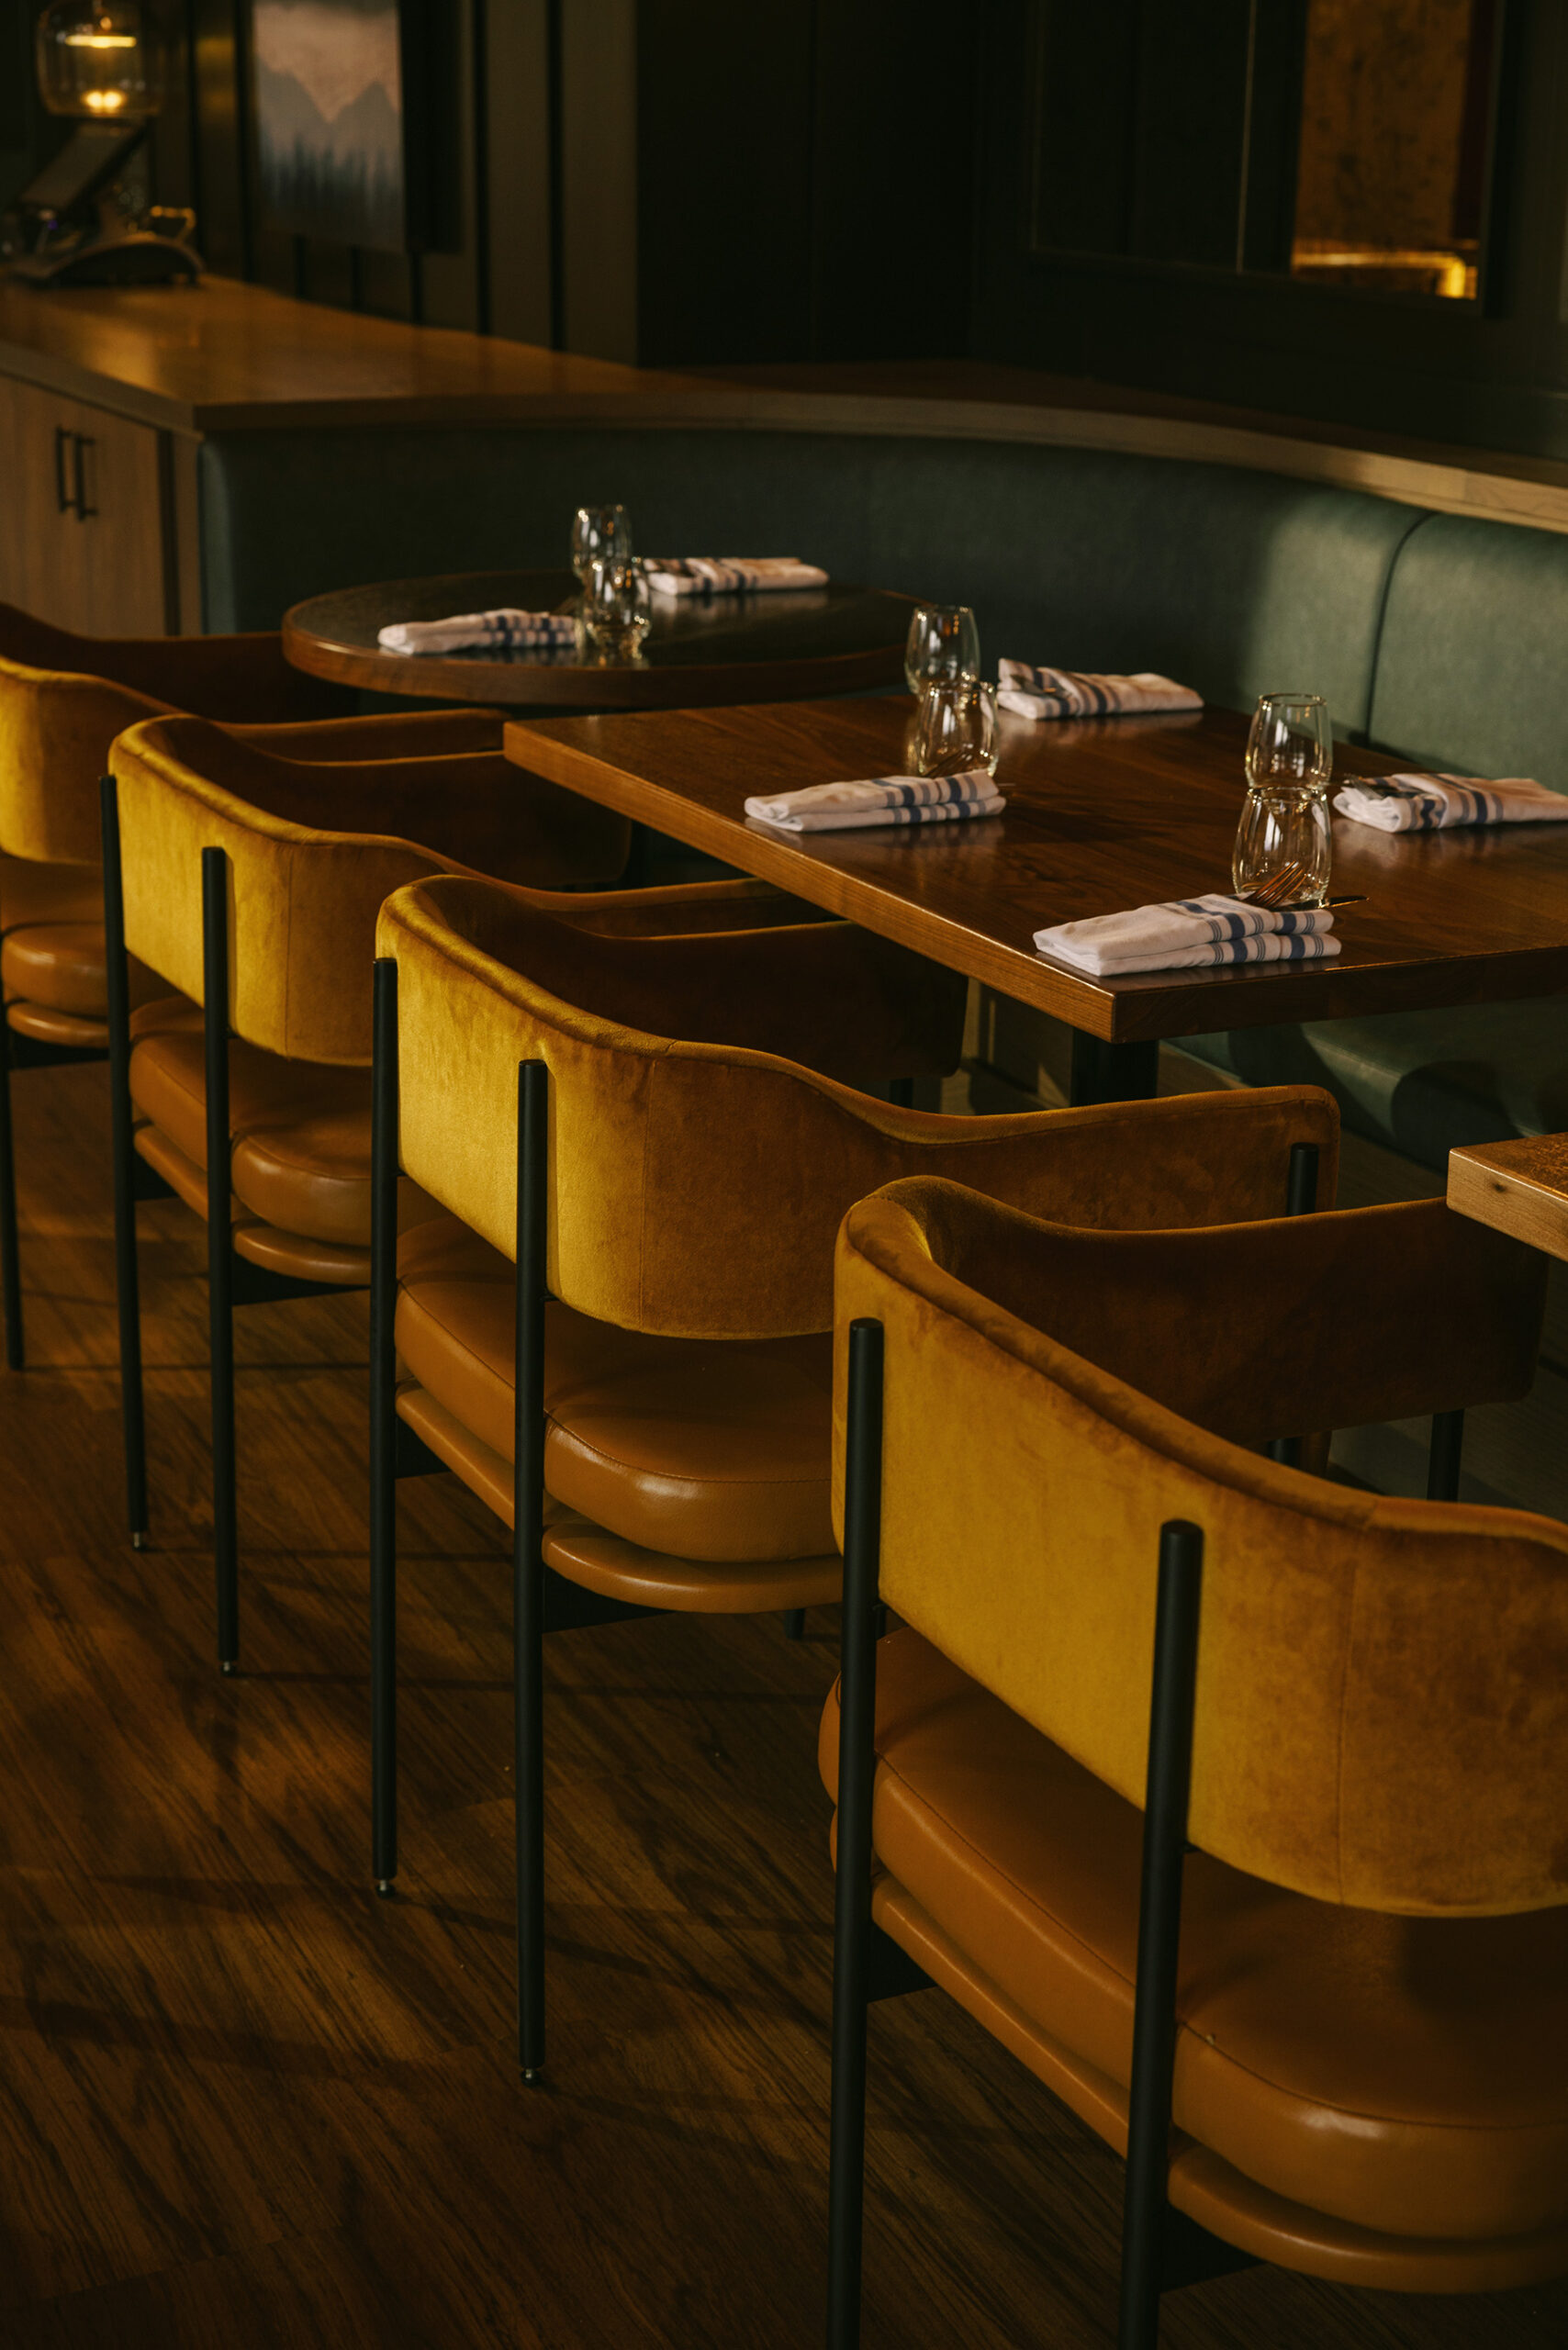 Four dark yellow chairs are featured in a line, facing a green banquette with warm wooden tables in between.